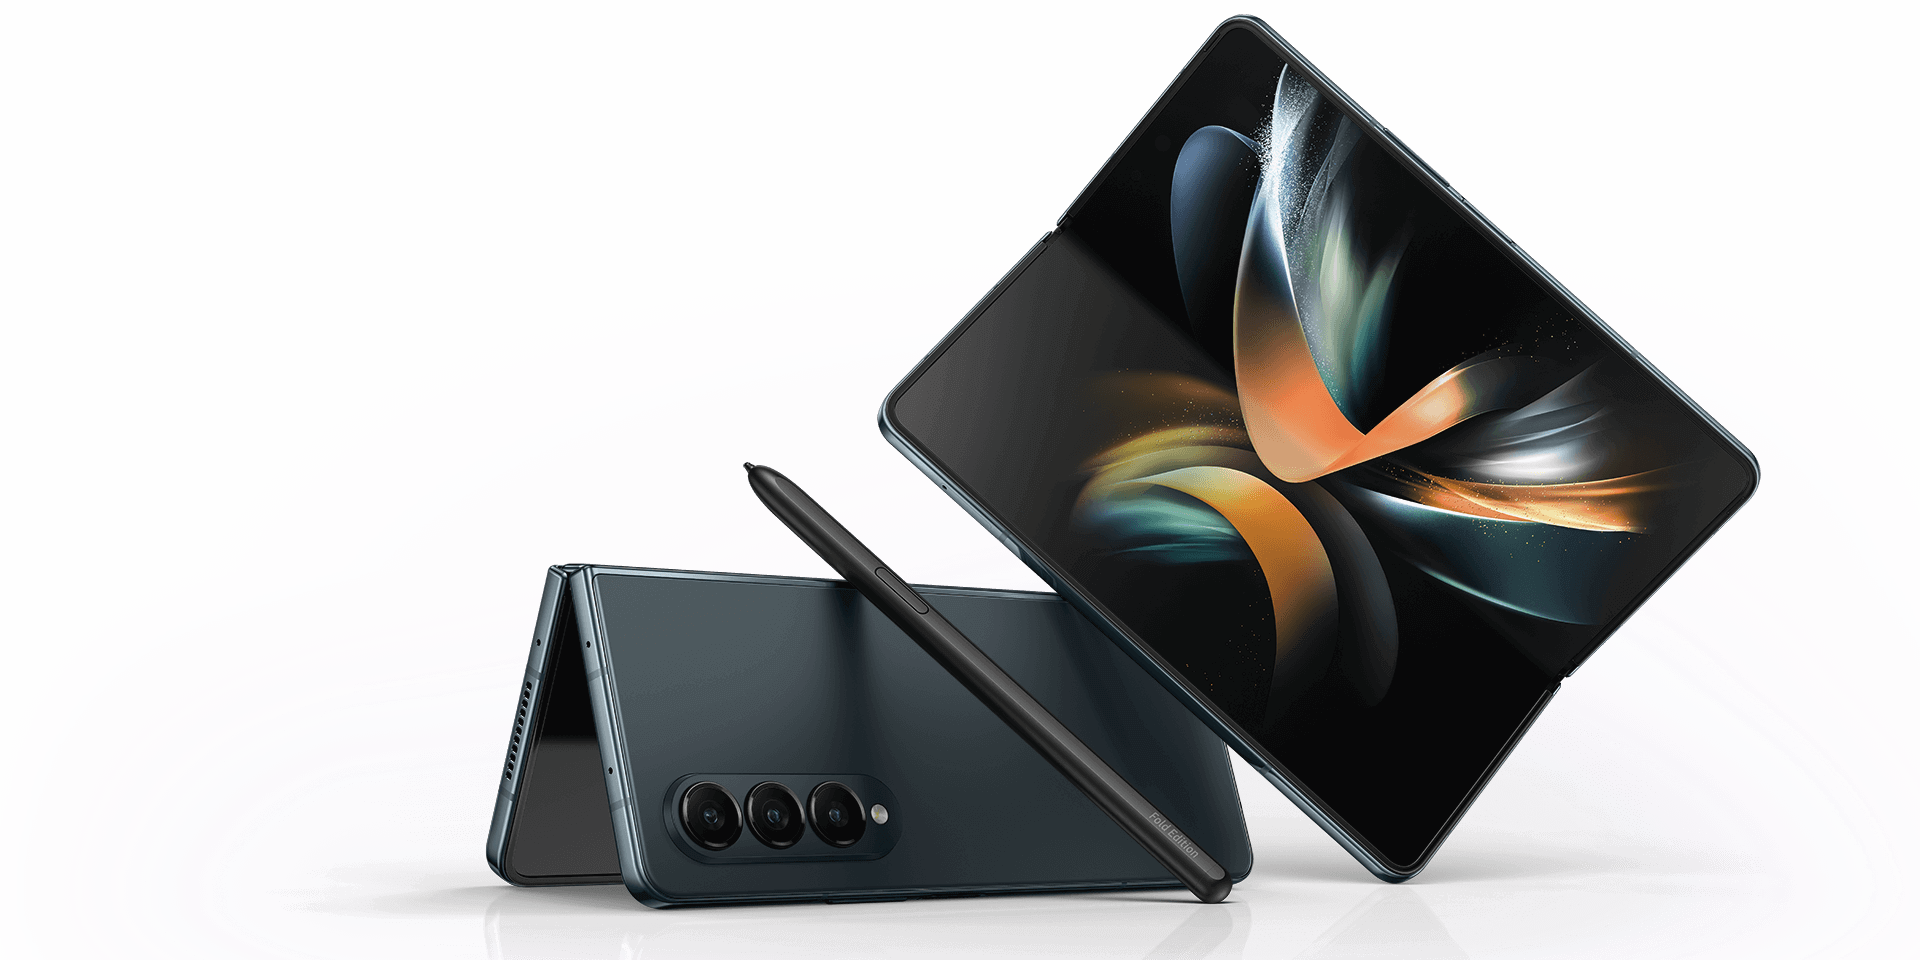 Two Samsung Galaxy Z Fold4s on display, one is semi folded facing down with an S Pen placed onto it that’s sold separately. The other Z Fold4 is mostly opened, in Flex mode, with screen facing towards viewer.